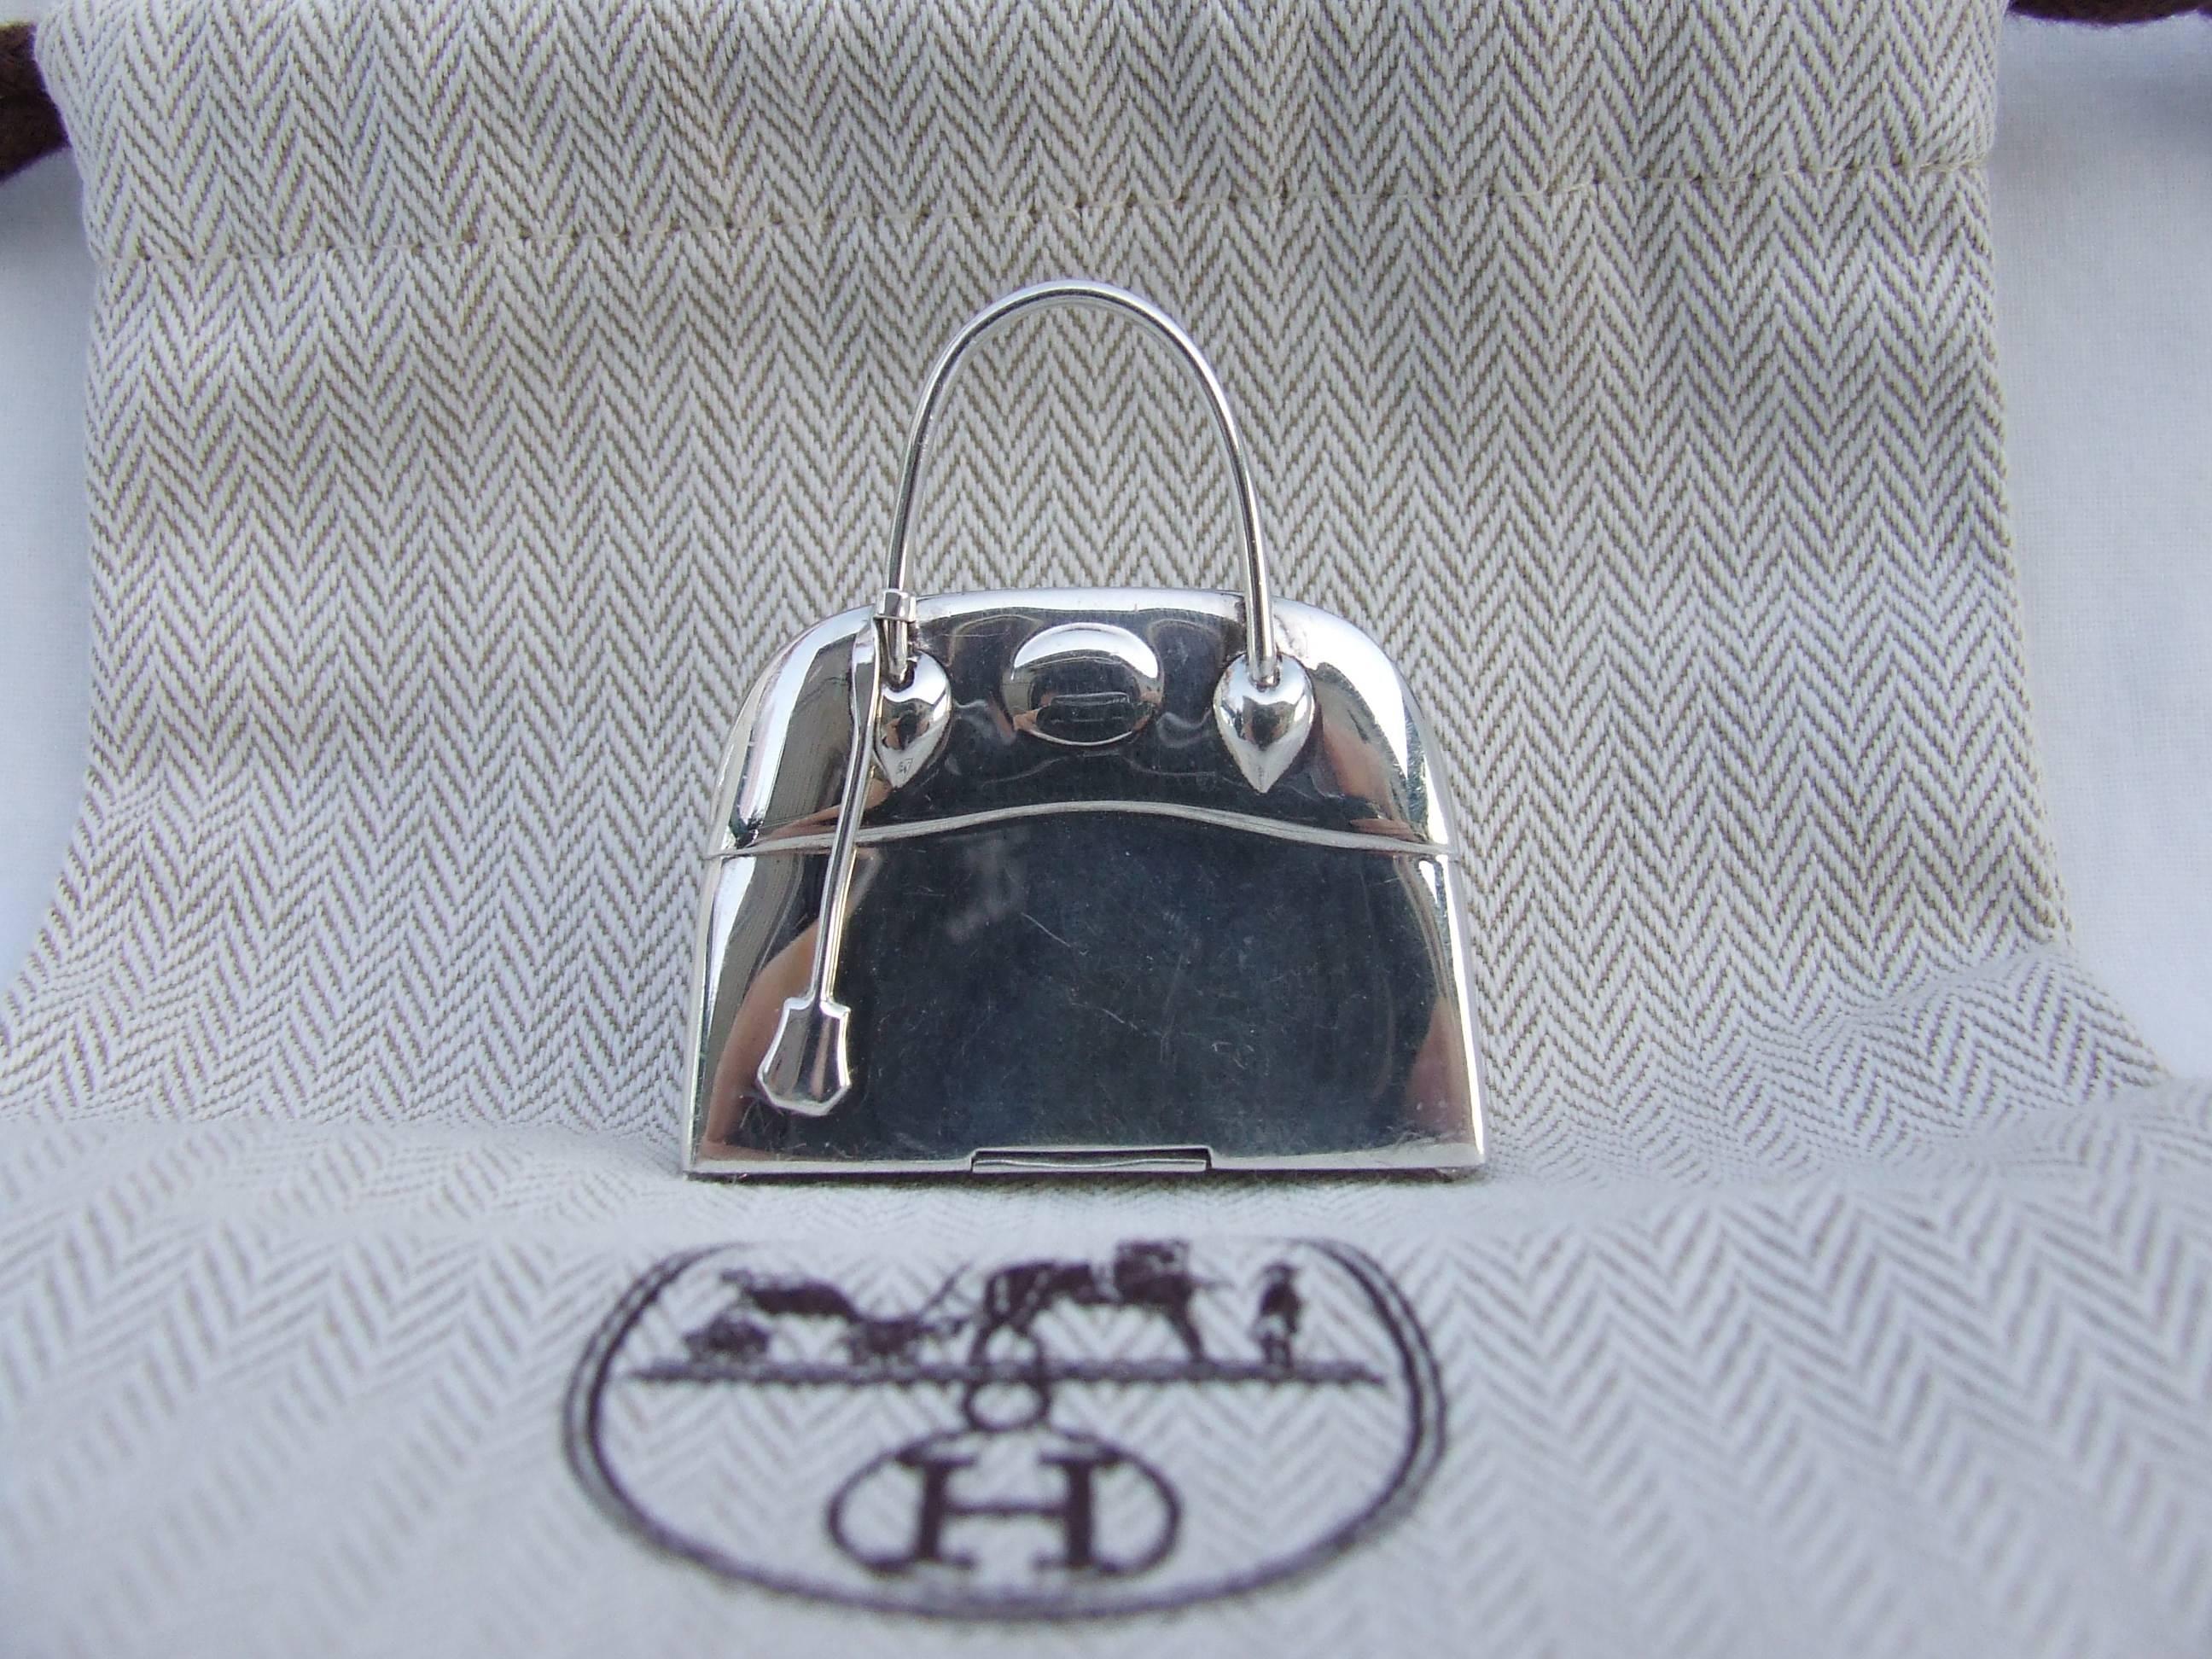 Super Cute Authentic Hermes Pill Box

In shape of "BOLIDE" Hermes Bag

Made of Silver 925

Opens by the bottom

Can be hung on a belt, handbag, necklace

2 minerve hallmarks, "925" in a circle

"HERMES PARIS" and